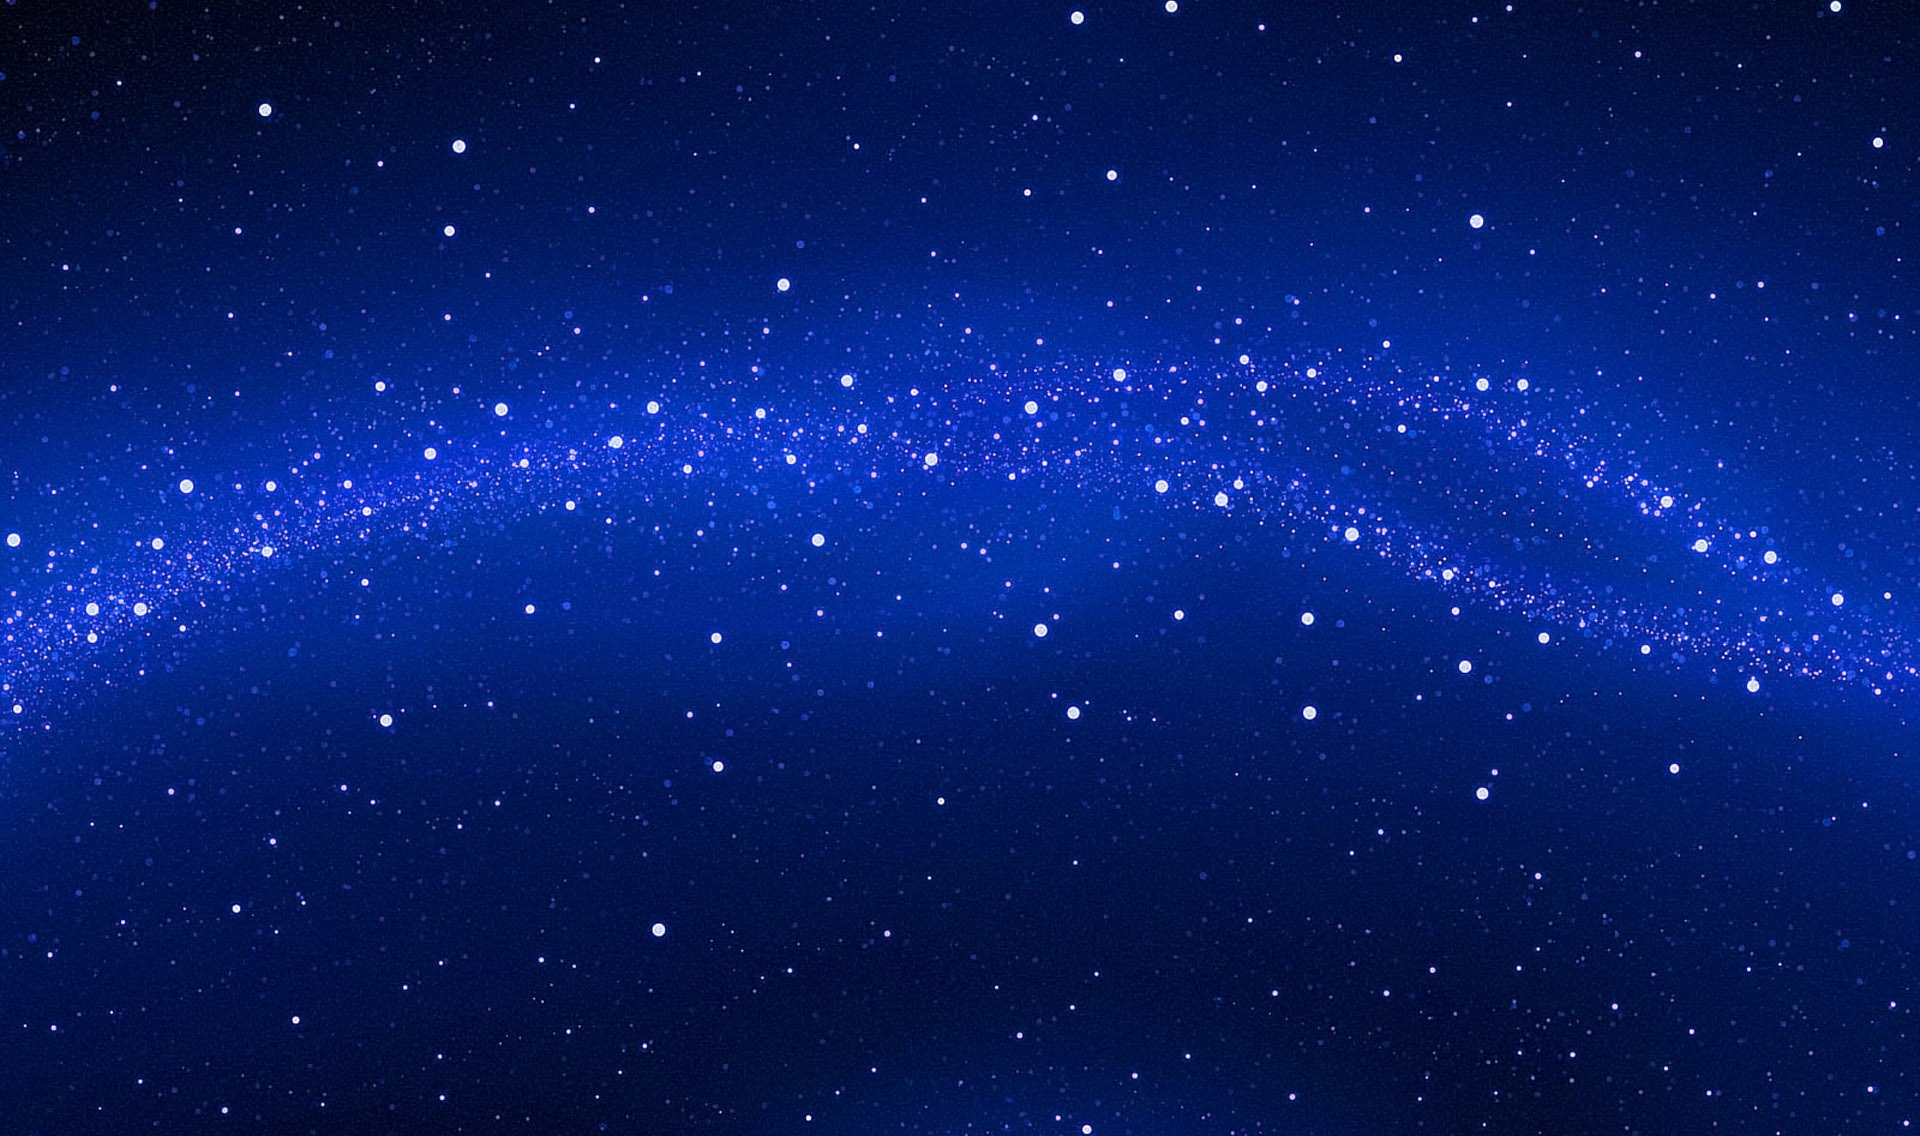 1 Night Sky HD Wallpapers Backgrounds